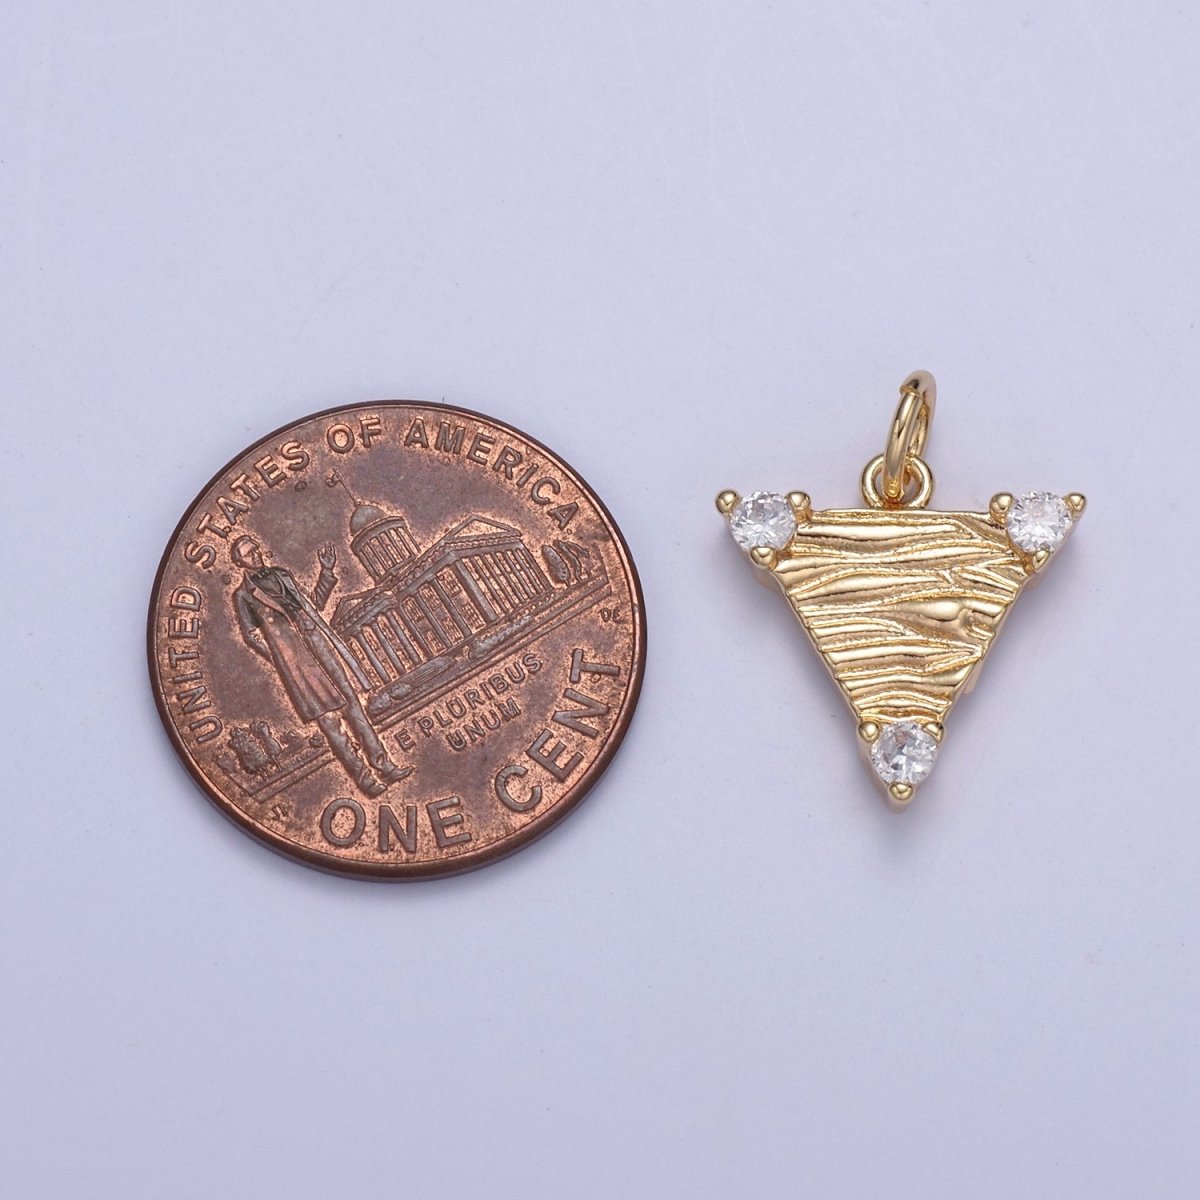 16k Gold Filled Dainty Triangle Charm Cubic Zirconia Charm in Gold micro Pave CZ Geometric Charm N-432 - DLUXCA